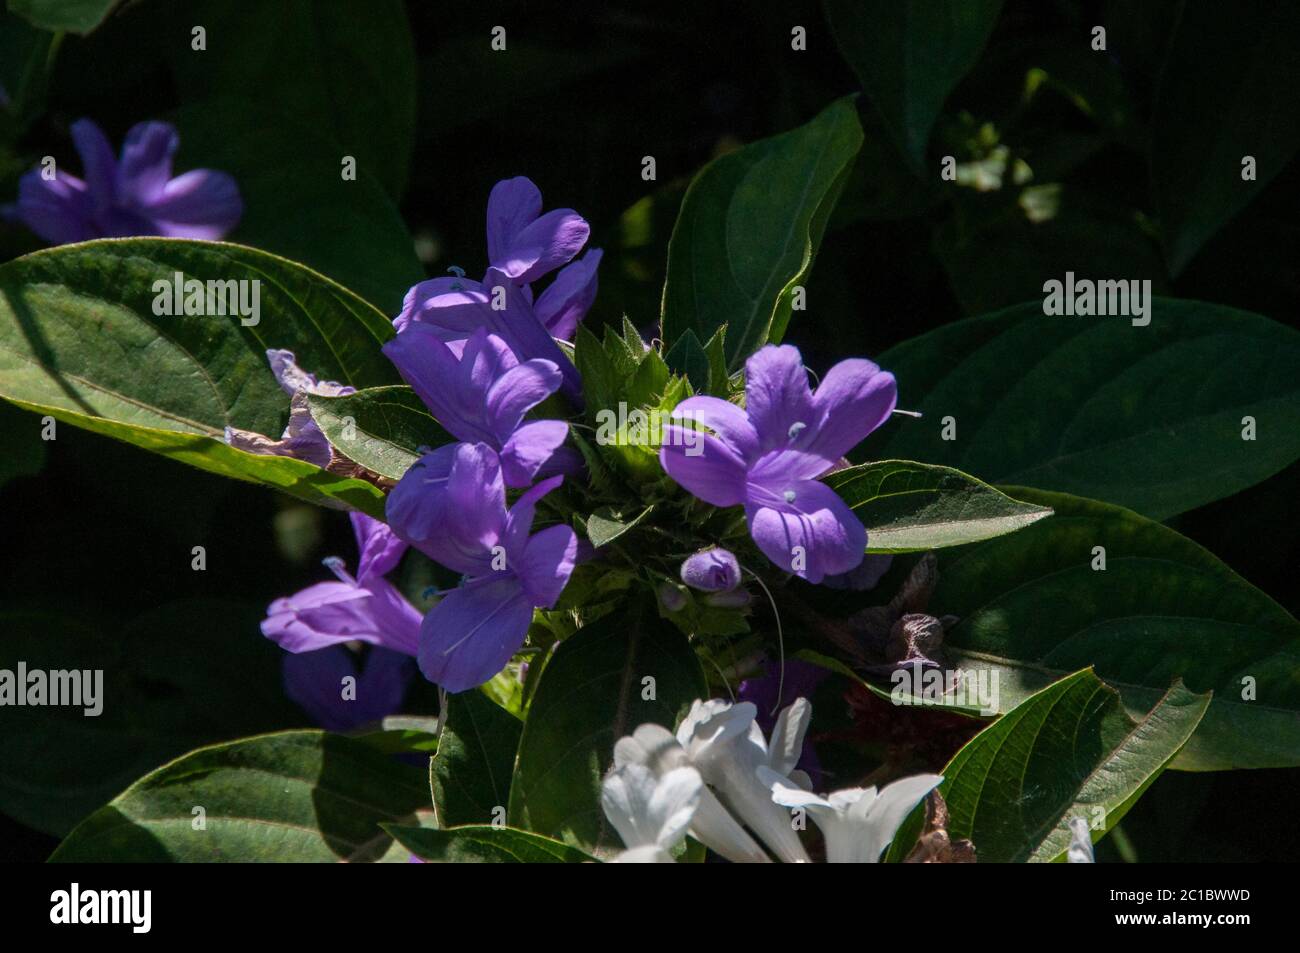 Barleria cristata, the Philippine violet, bluebell barleria or crested Philippine violet, is a plant species in the family Acanthaceae. Stock Photo